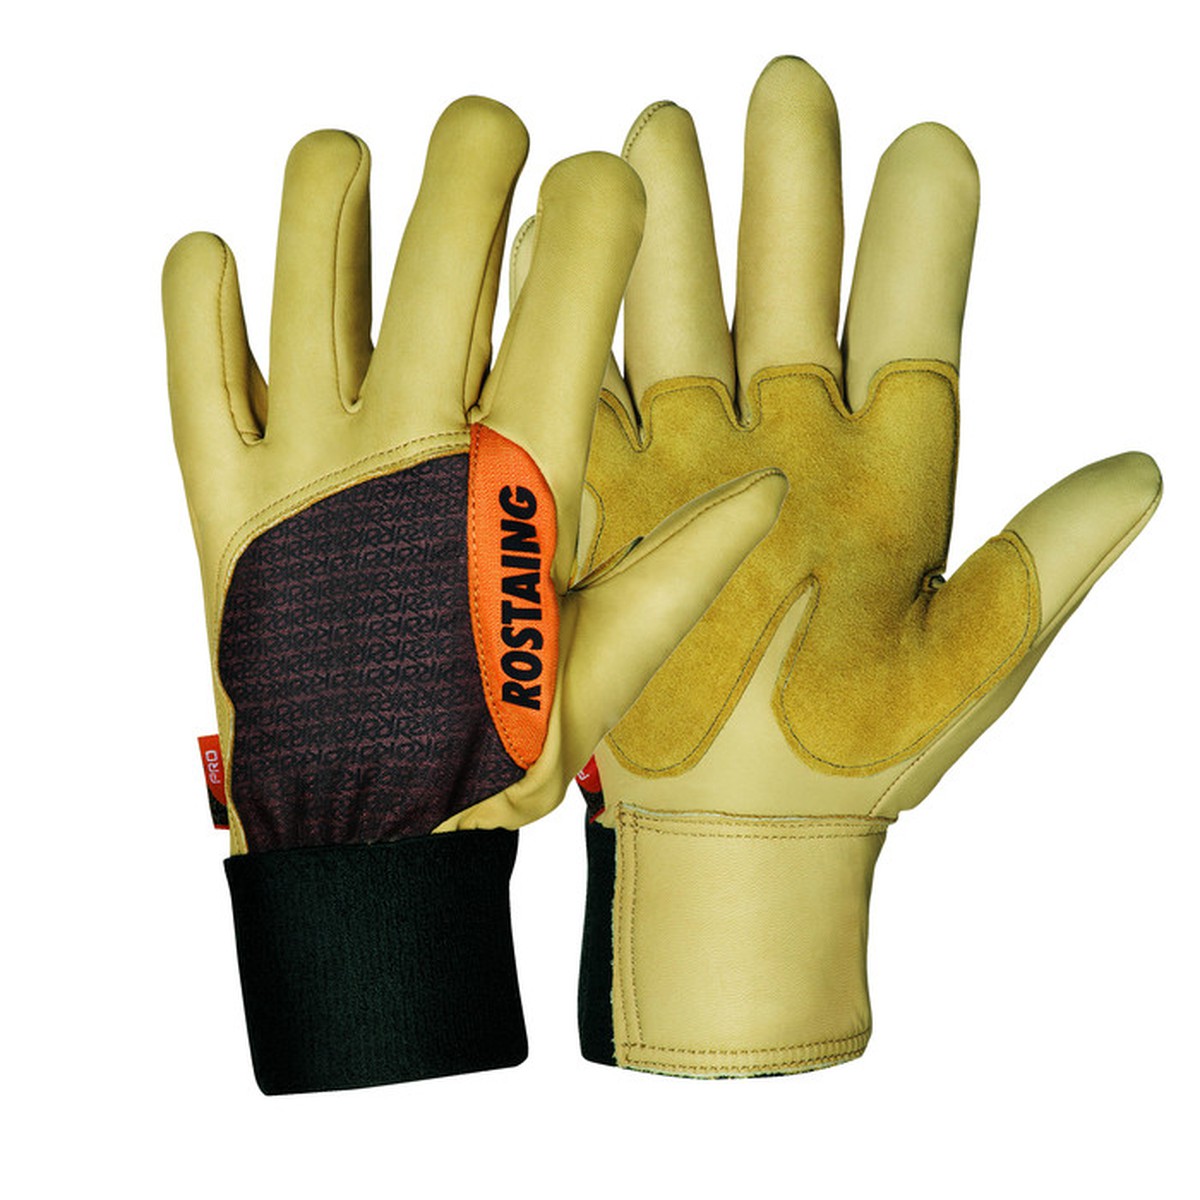 Rostaing  Gants Forest  Taille 11